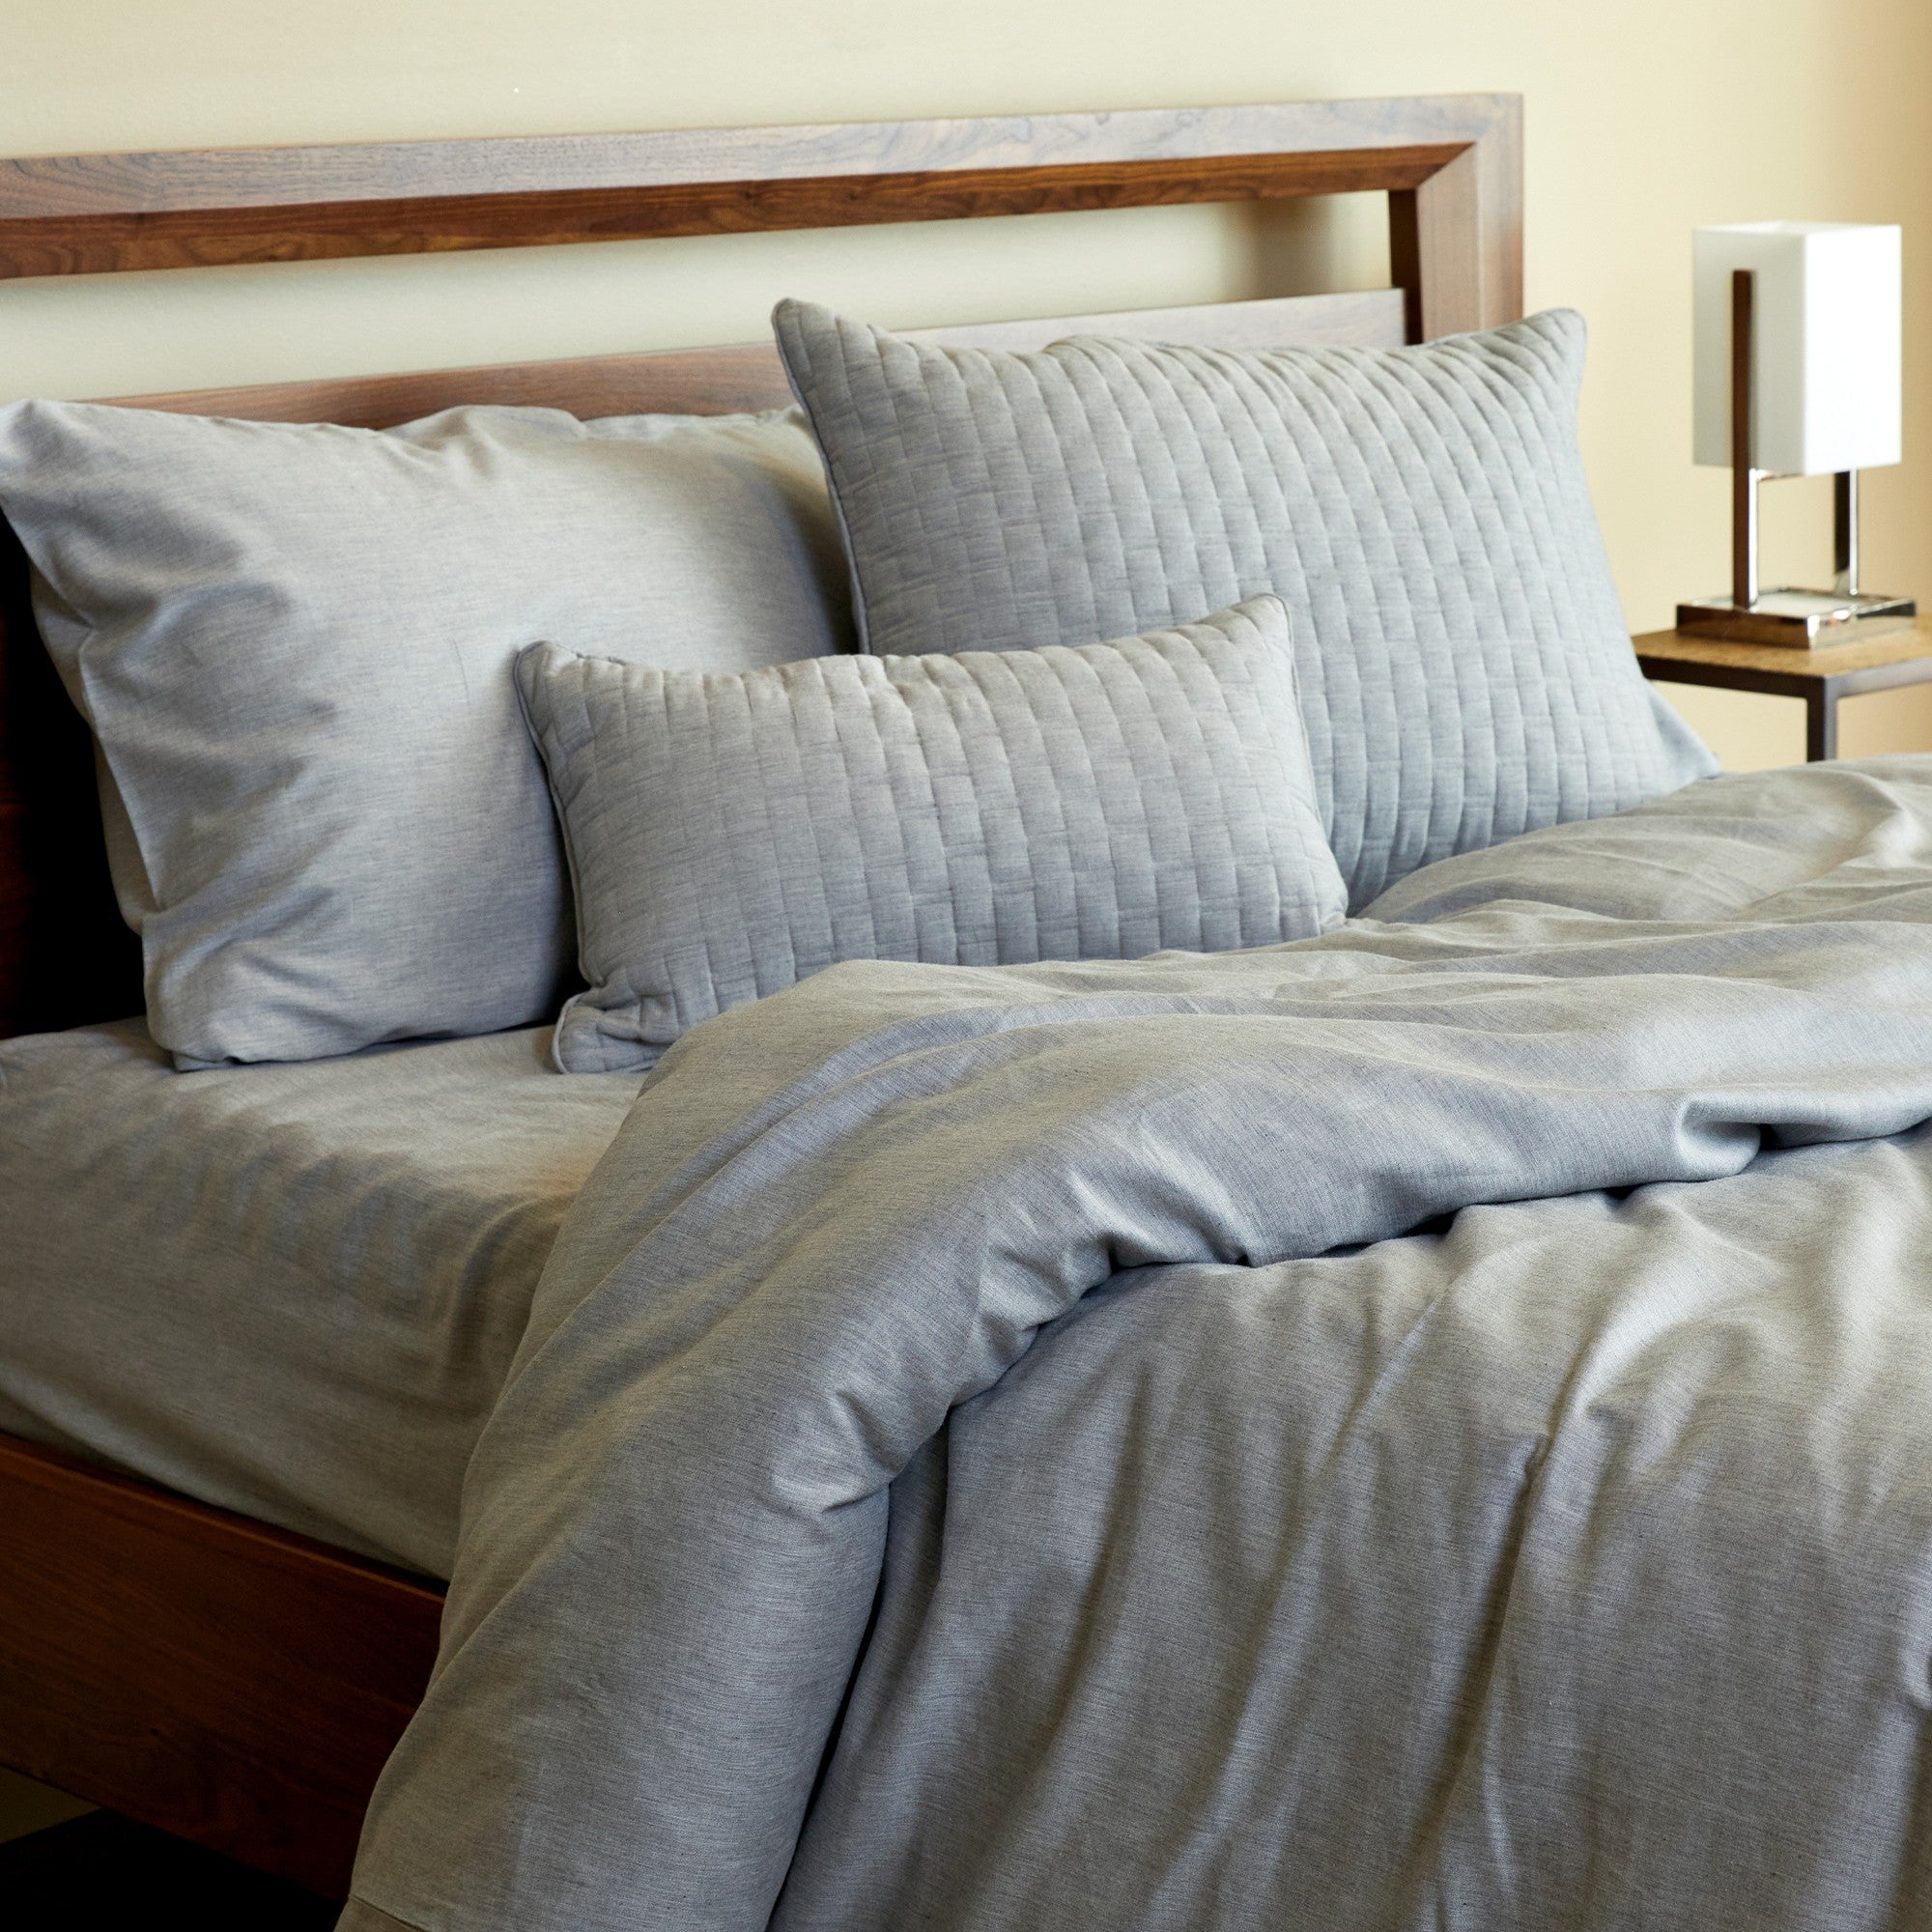 silver gray bamboo melange sheet set duvet cover and pillows in a fun and messy bed